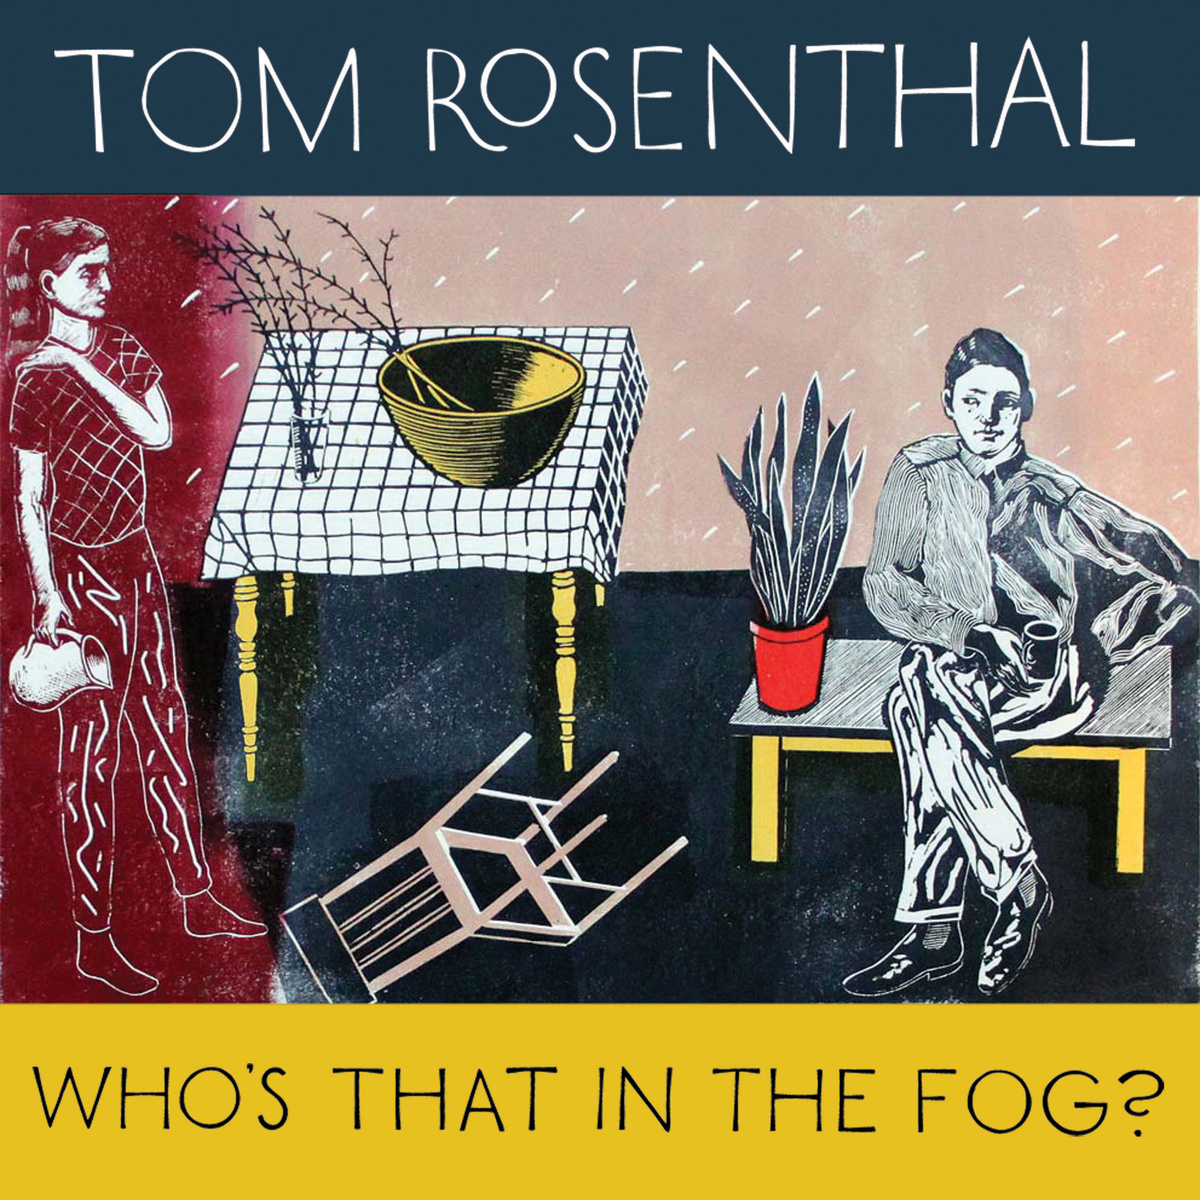 News Added Oct 09, 2013 "Who's That in the Fog?" is Tom Rosenthal's second album after "Keep a Private Room Behind the Shop". Submitted By Abu-Dun Track list: Added Oct 09, 2013 . As Luck Would Have It 2. Outerspace Mover 3. Sex, Death and Landscapes 4. Ian 5. Take Your Guess 6. Too Many […]